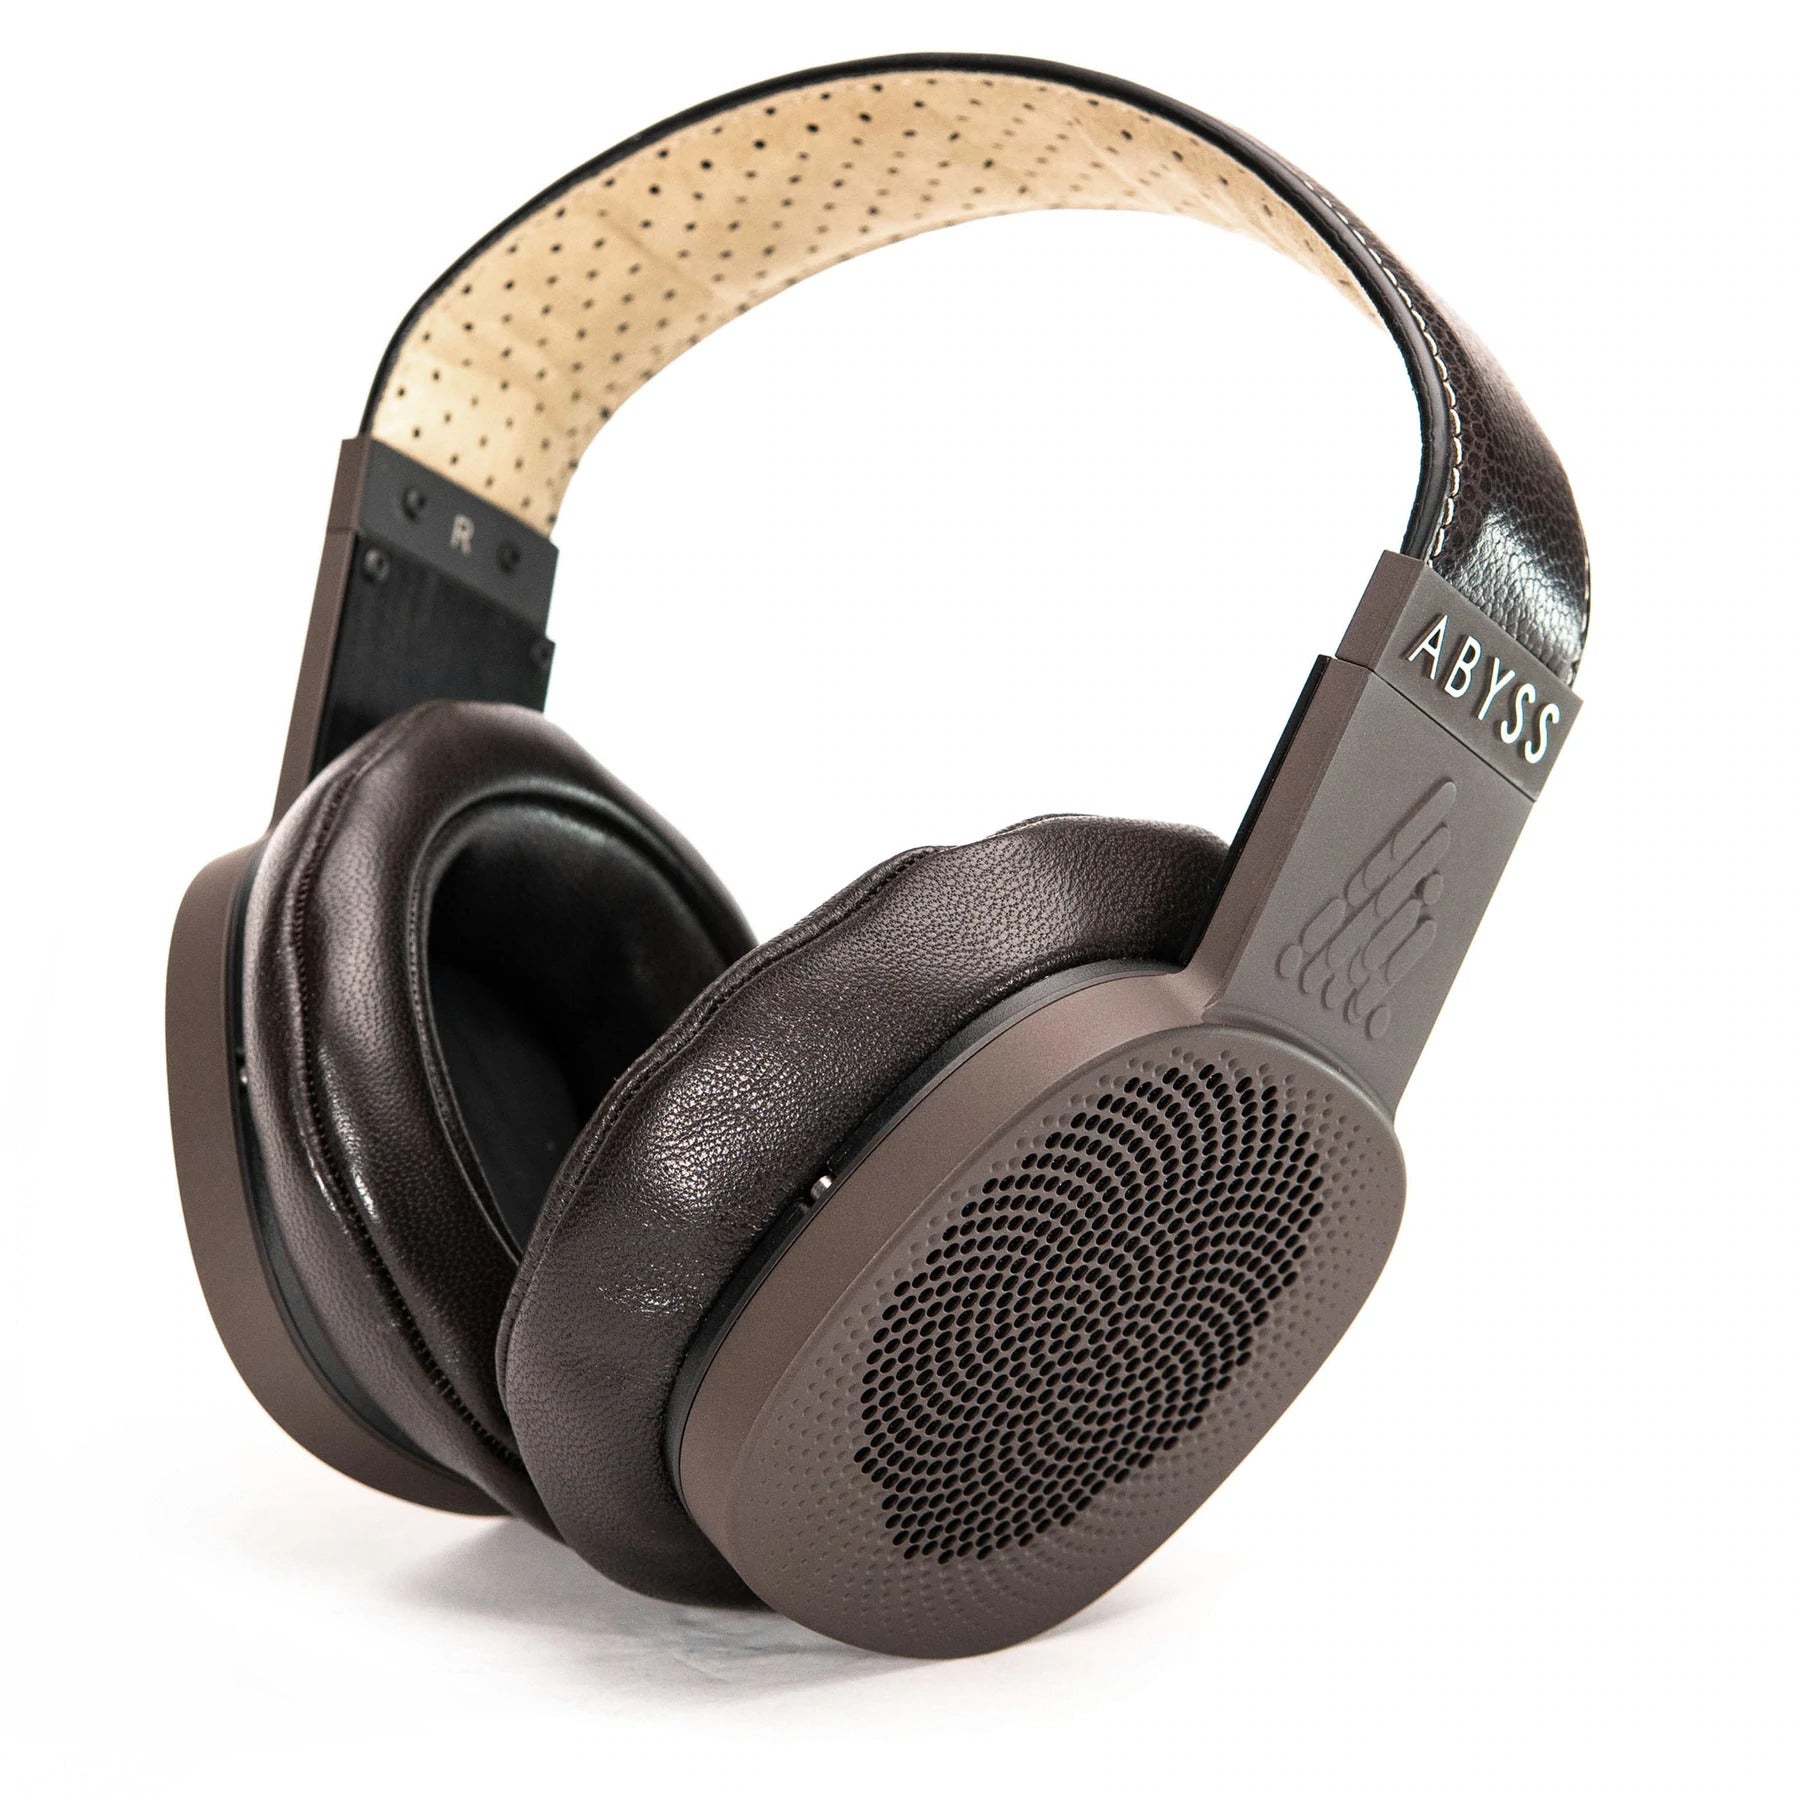 DIANA® TC Premium Audiophile Headphone by ABYSS (standard package)